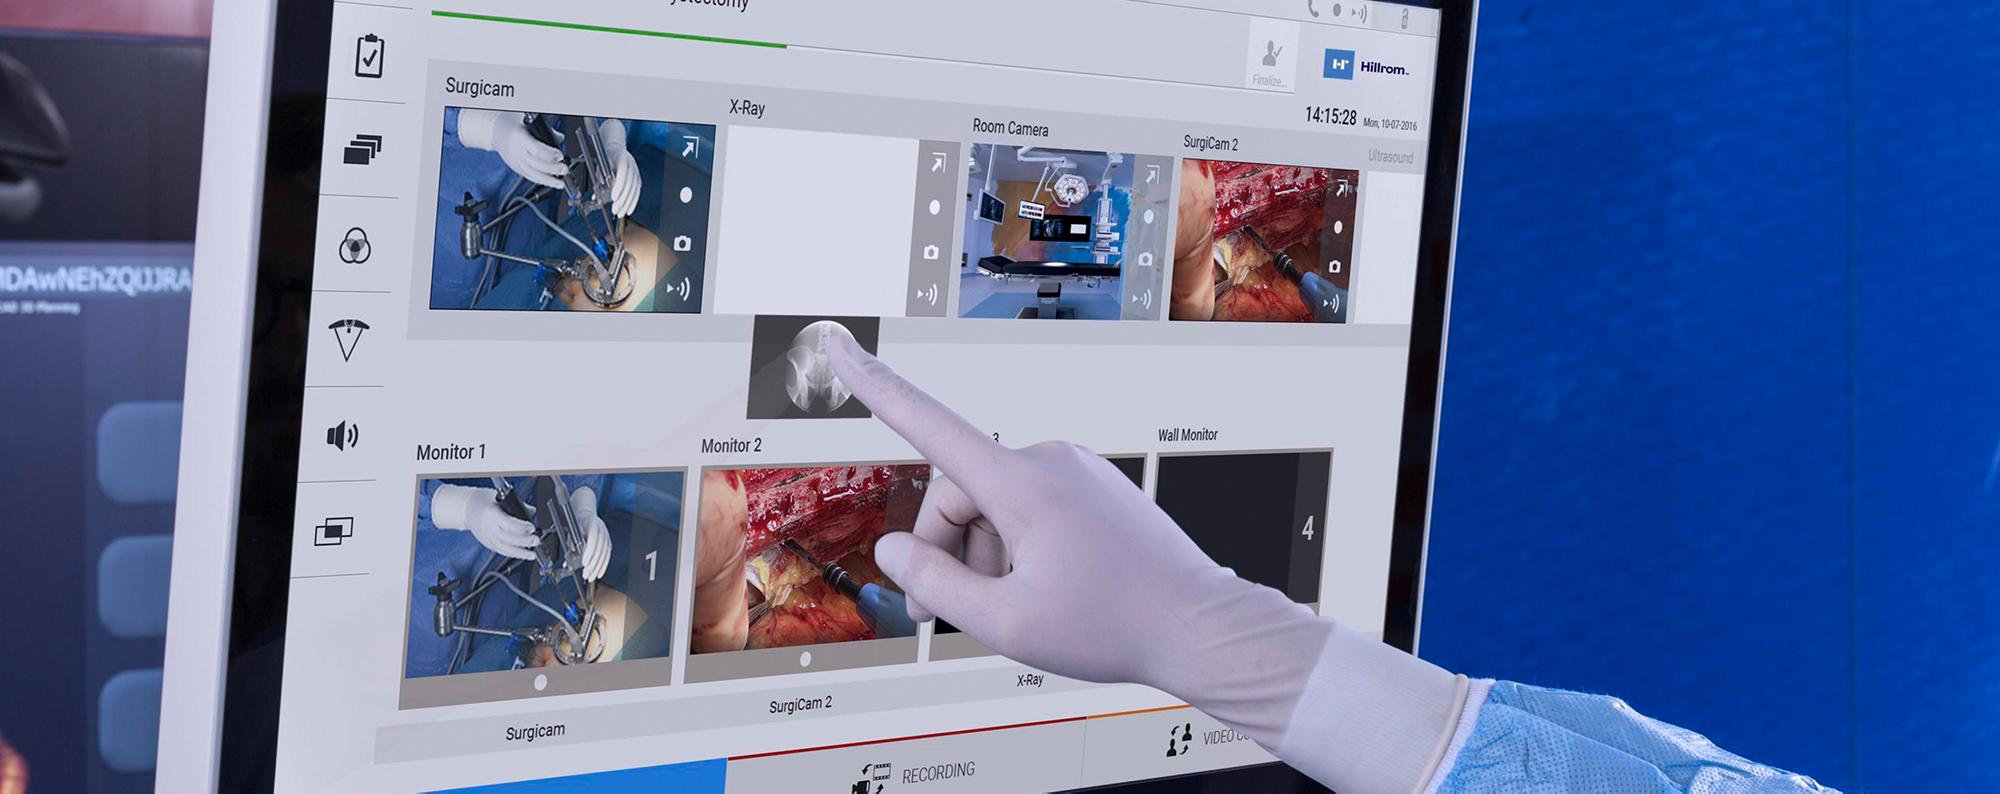 Gloved clinician uses the Helion system’s drag-and-drop functionality